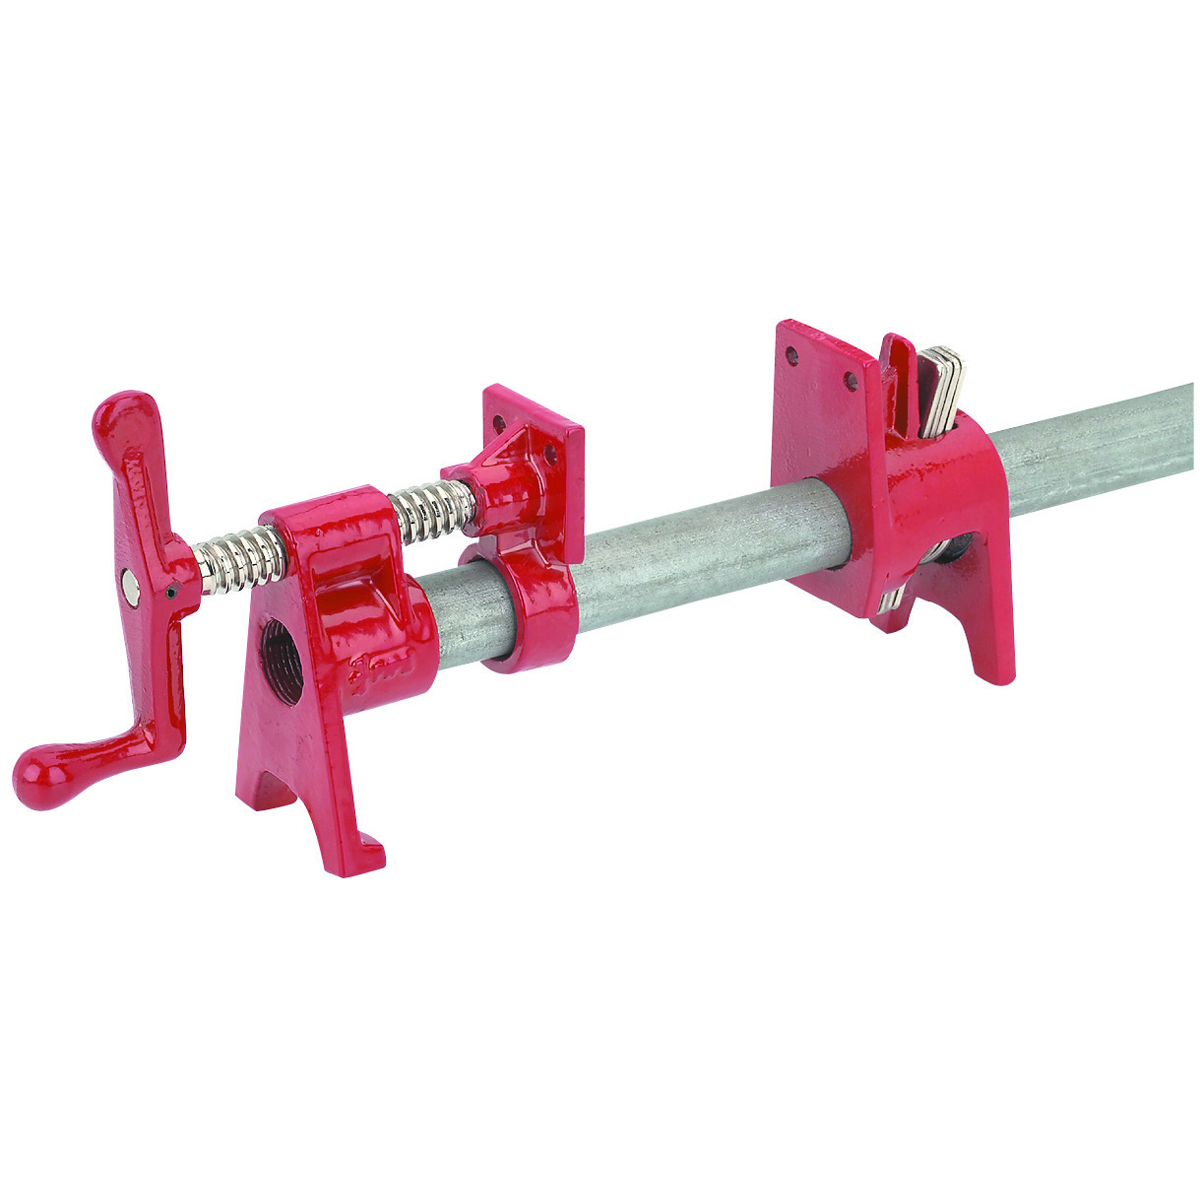 PITTSBURGH 3/4 in. Pipe Clamp with Base - Item 94053